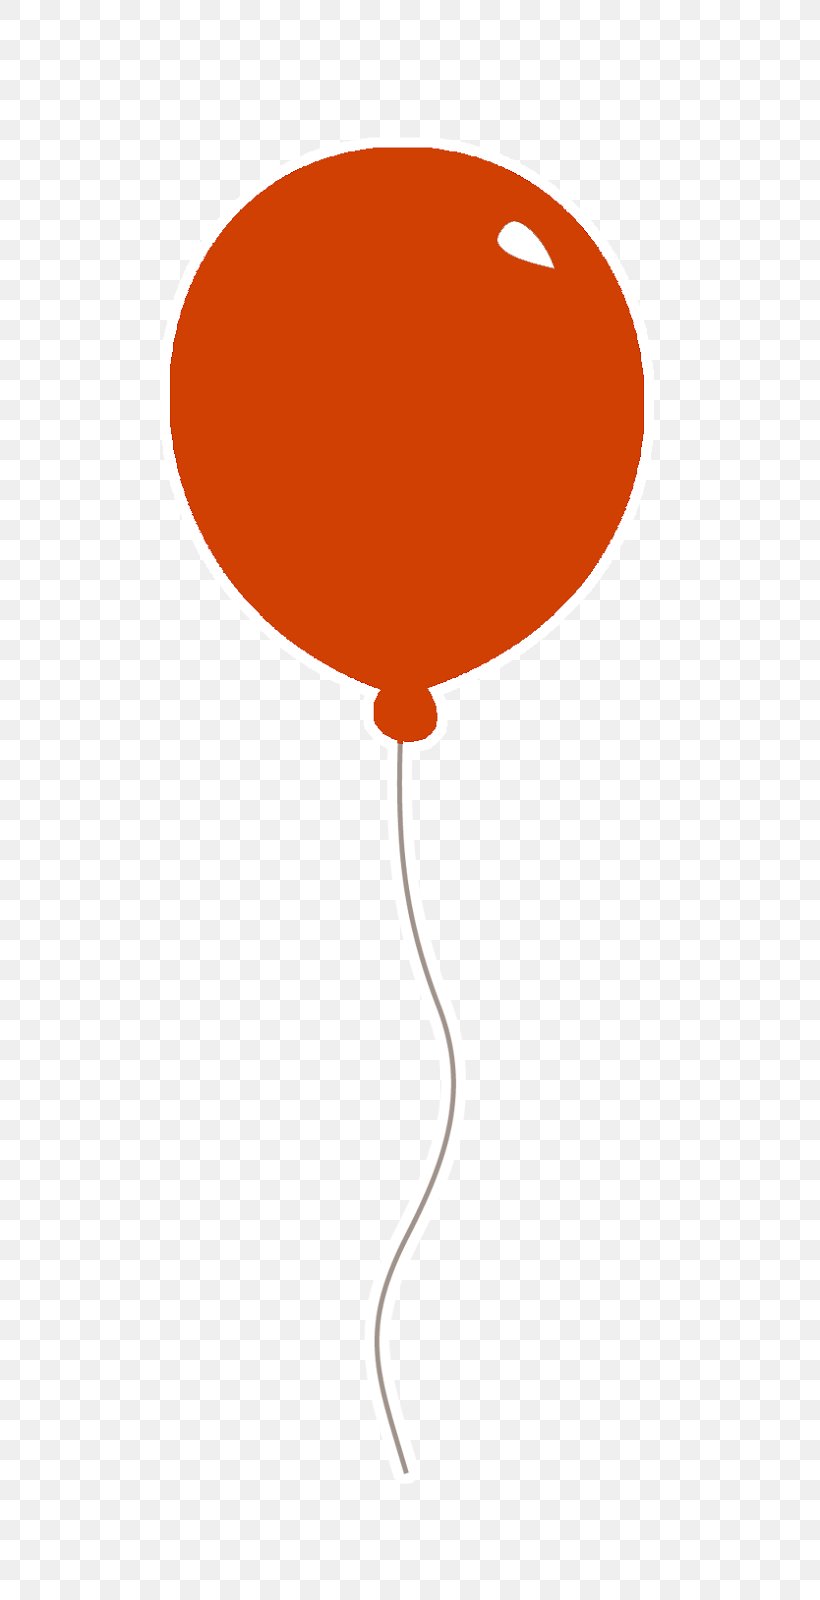 Product Design Line Clip Art, PNG, 595x1600px, Redm, Balloon, Orange, Party Supply Download Free